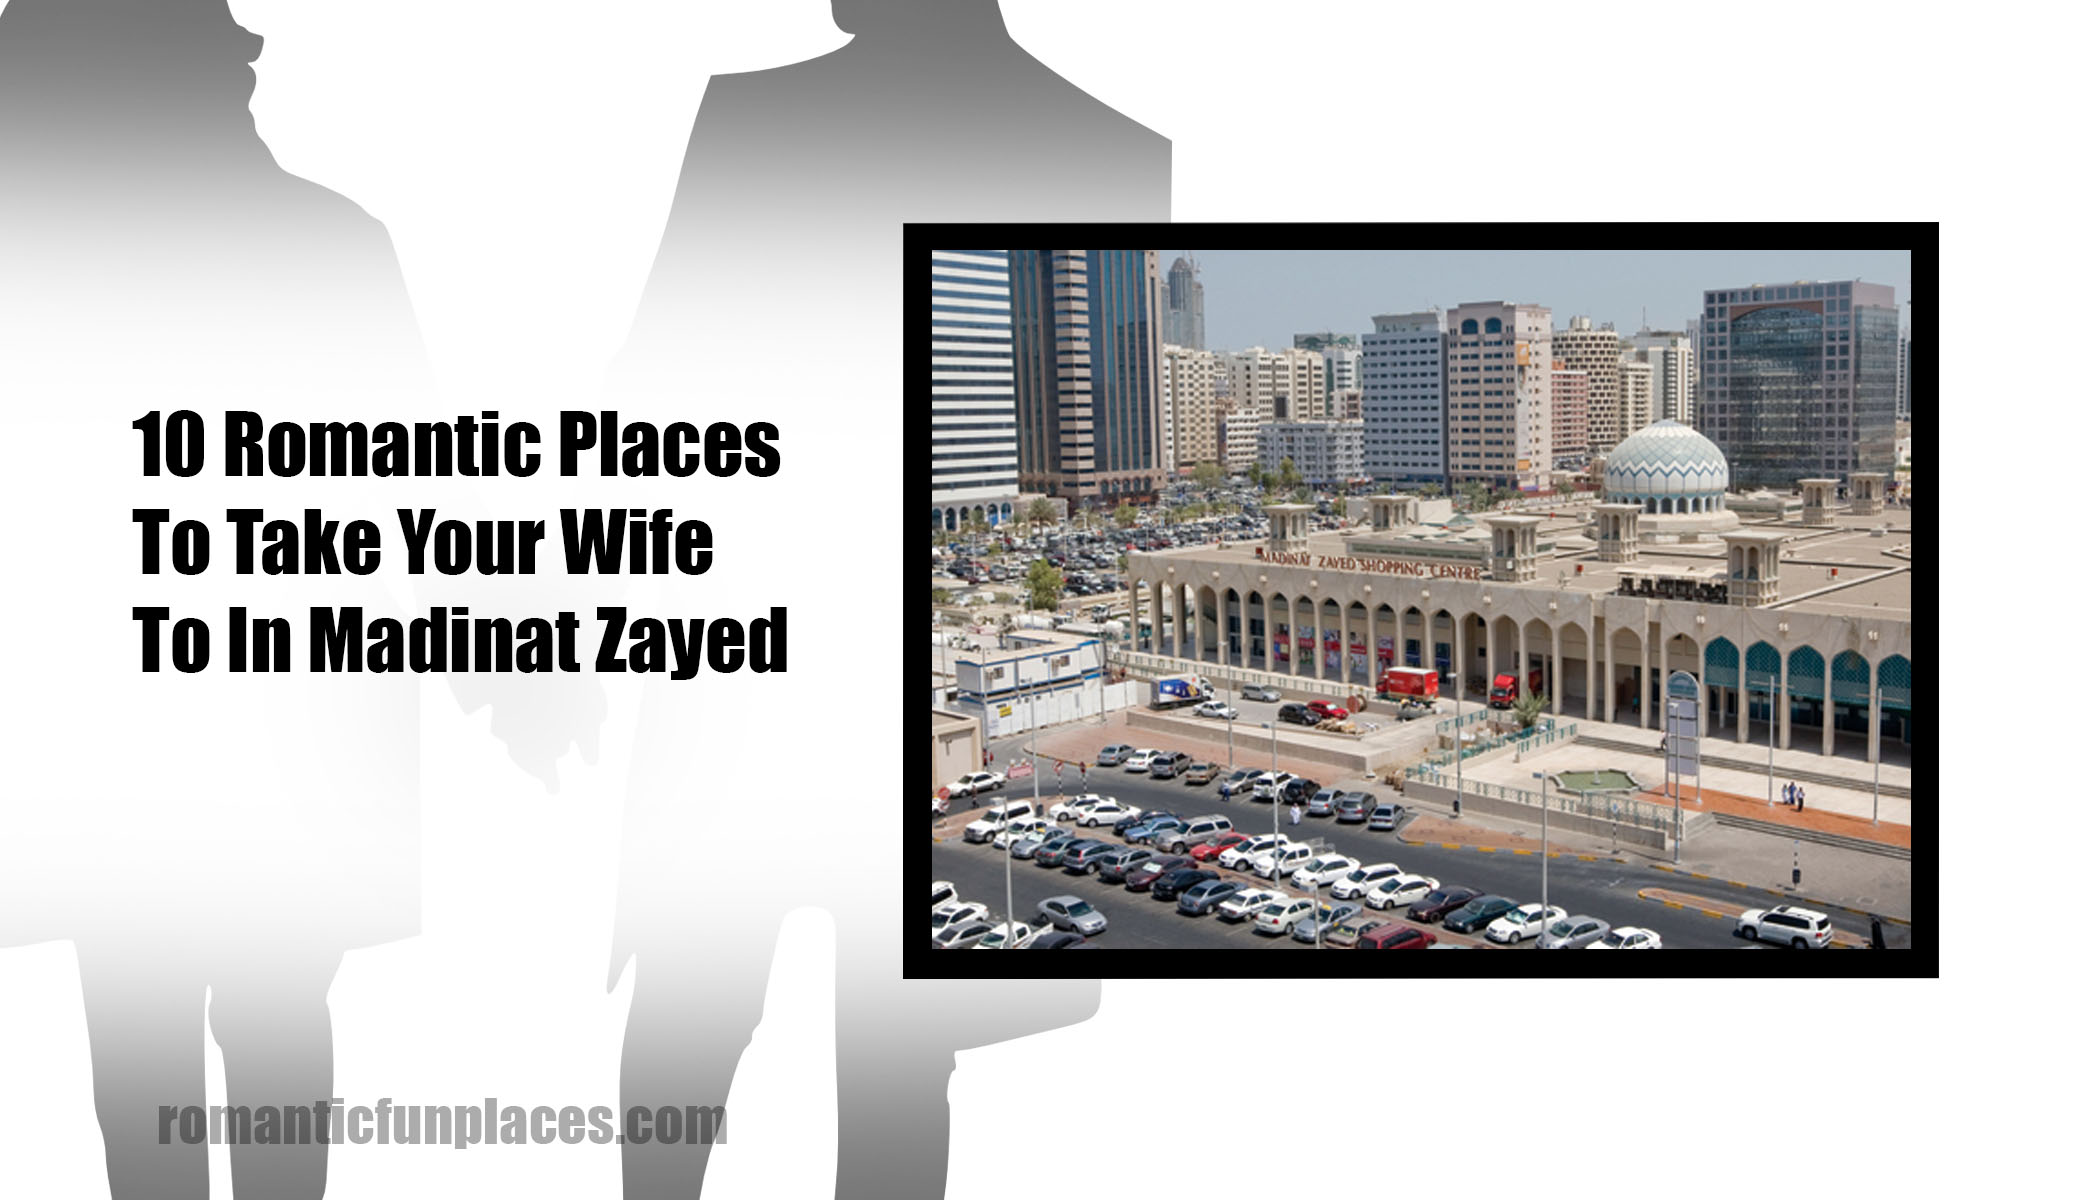 10 Romantic Places To Take Your Wife To In Madinat Zayed